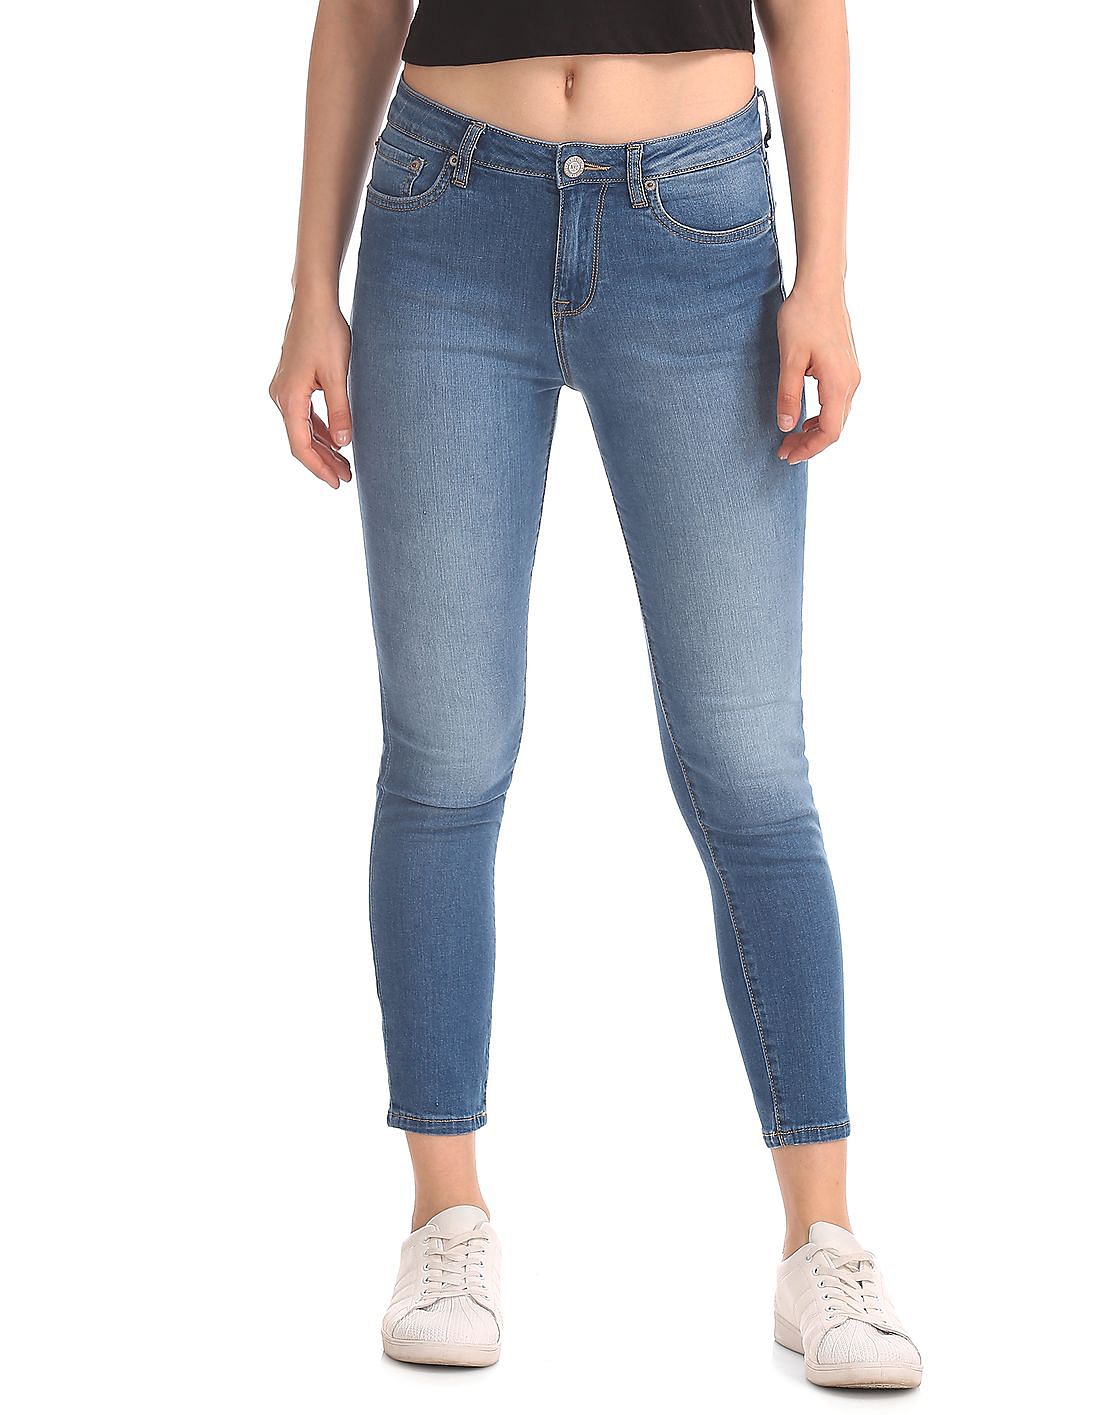 Buy Aeropostale Jegging Fit Mid Rise Jeans - NNNOW.com